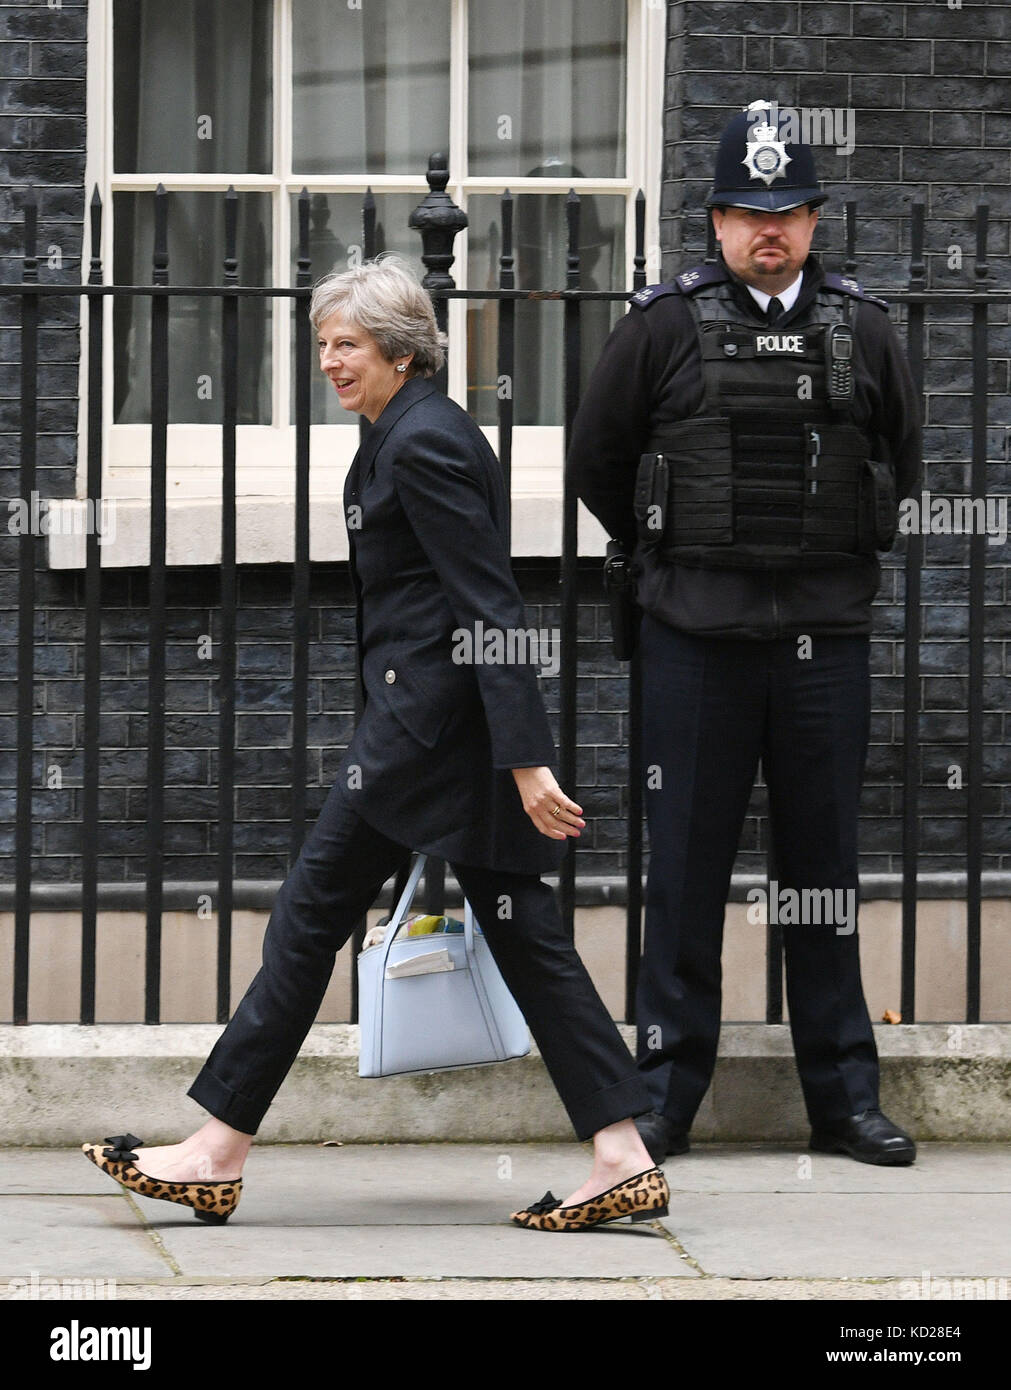 Premierminister Theresea May kommt vor einer Sitzung des Business Advisory Council in der Downing Street 10 an. Stockfoto